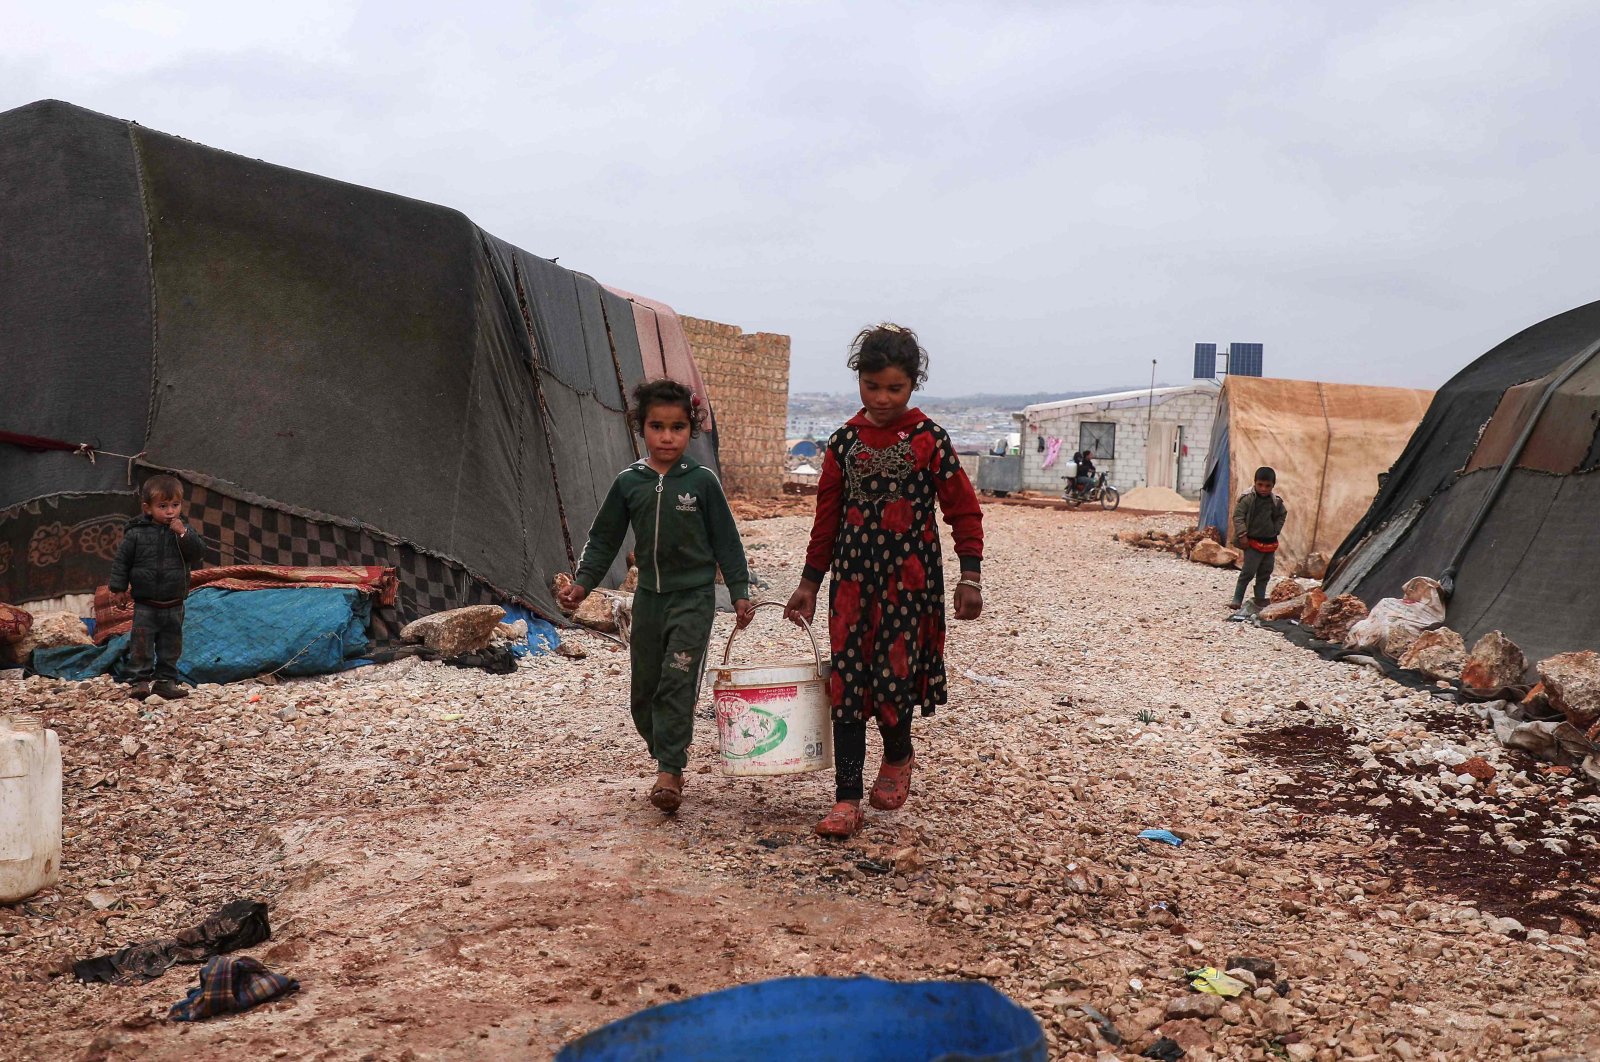 On the occasion of International Day for Children&#039;s Rights, children are seen carrying a bucket of water in the Bardaqli camp for displaced people in the town of Dana as winter approaches, Idlib province, northwestern Syria, Nov. 20, 2021 (AFP Photo)